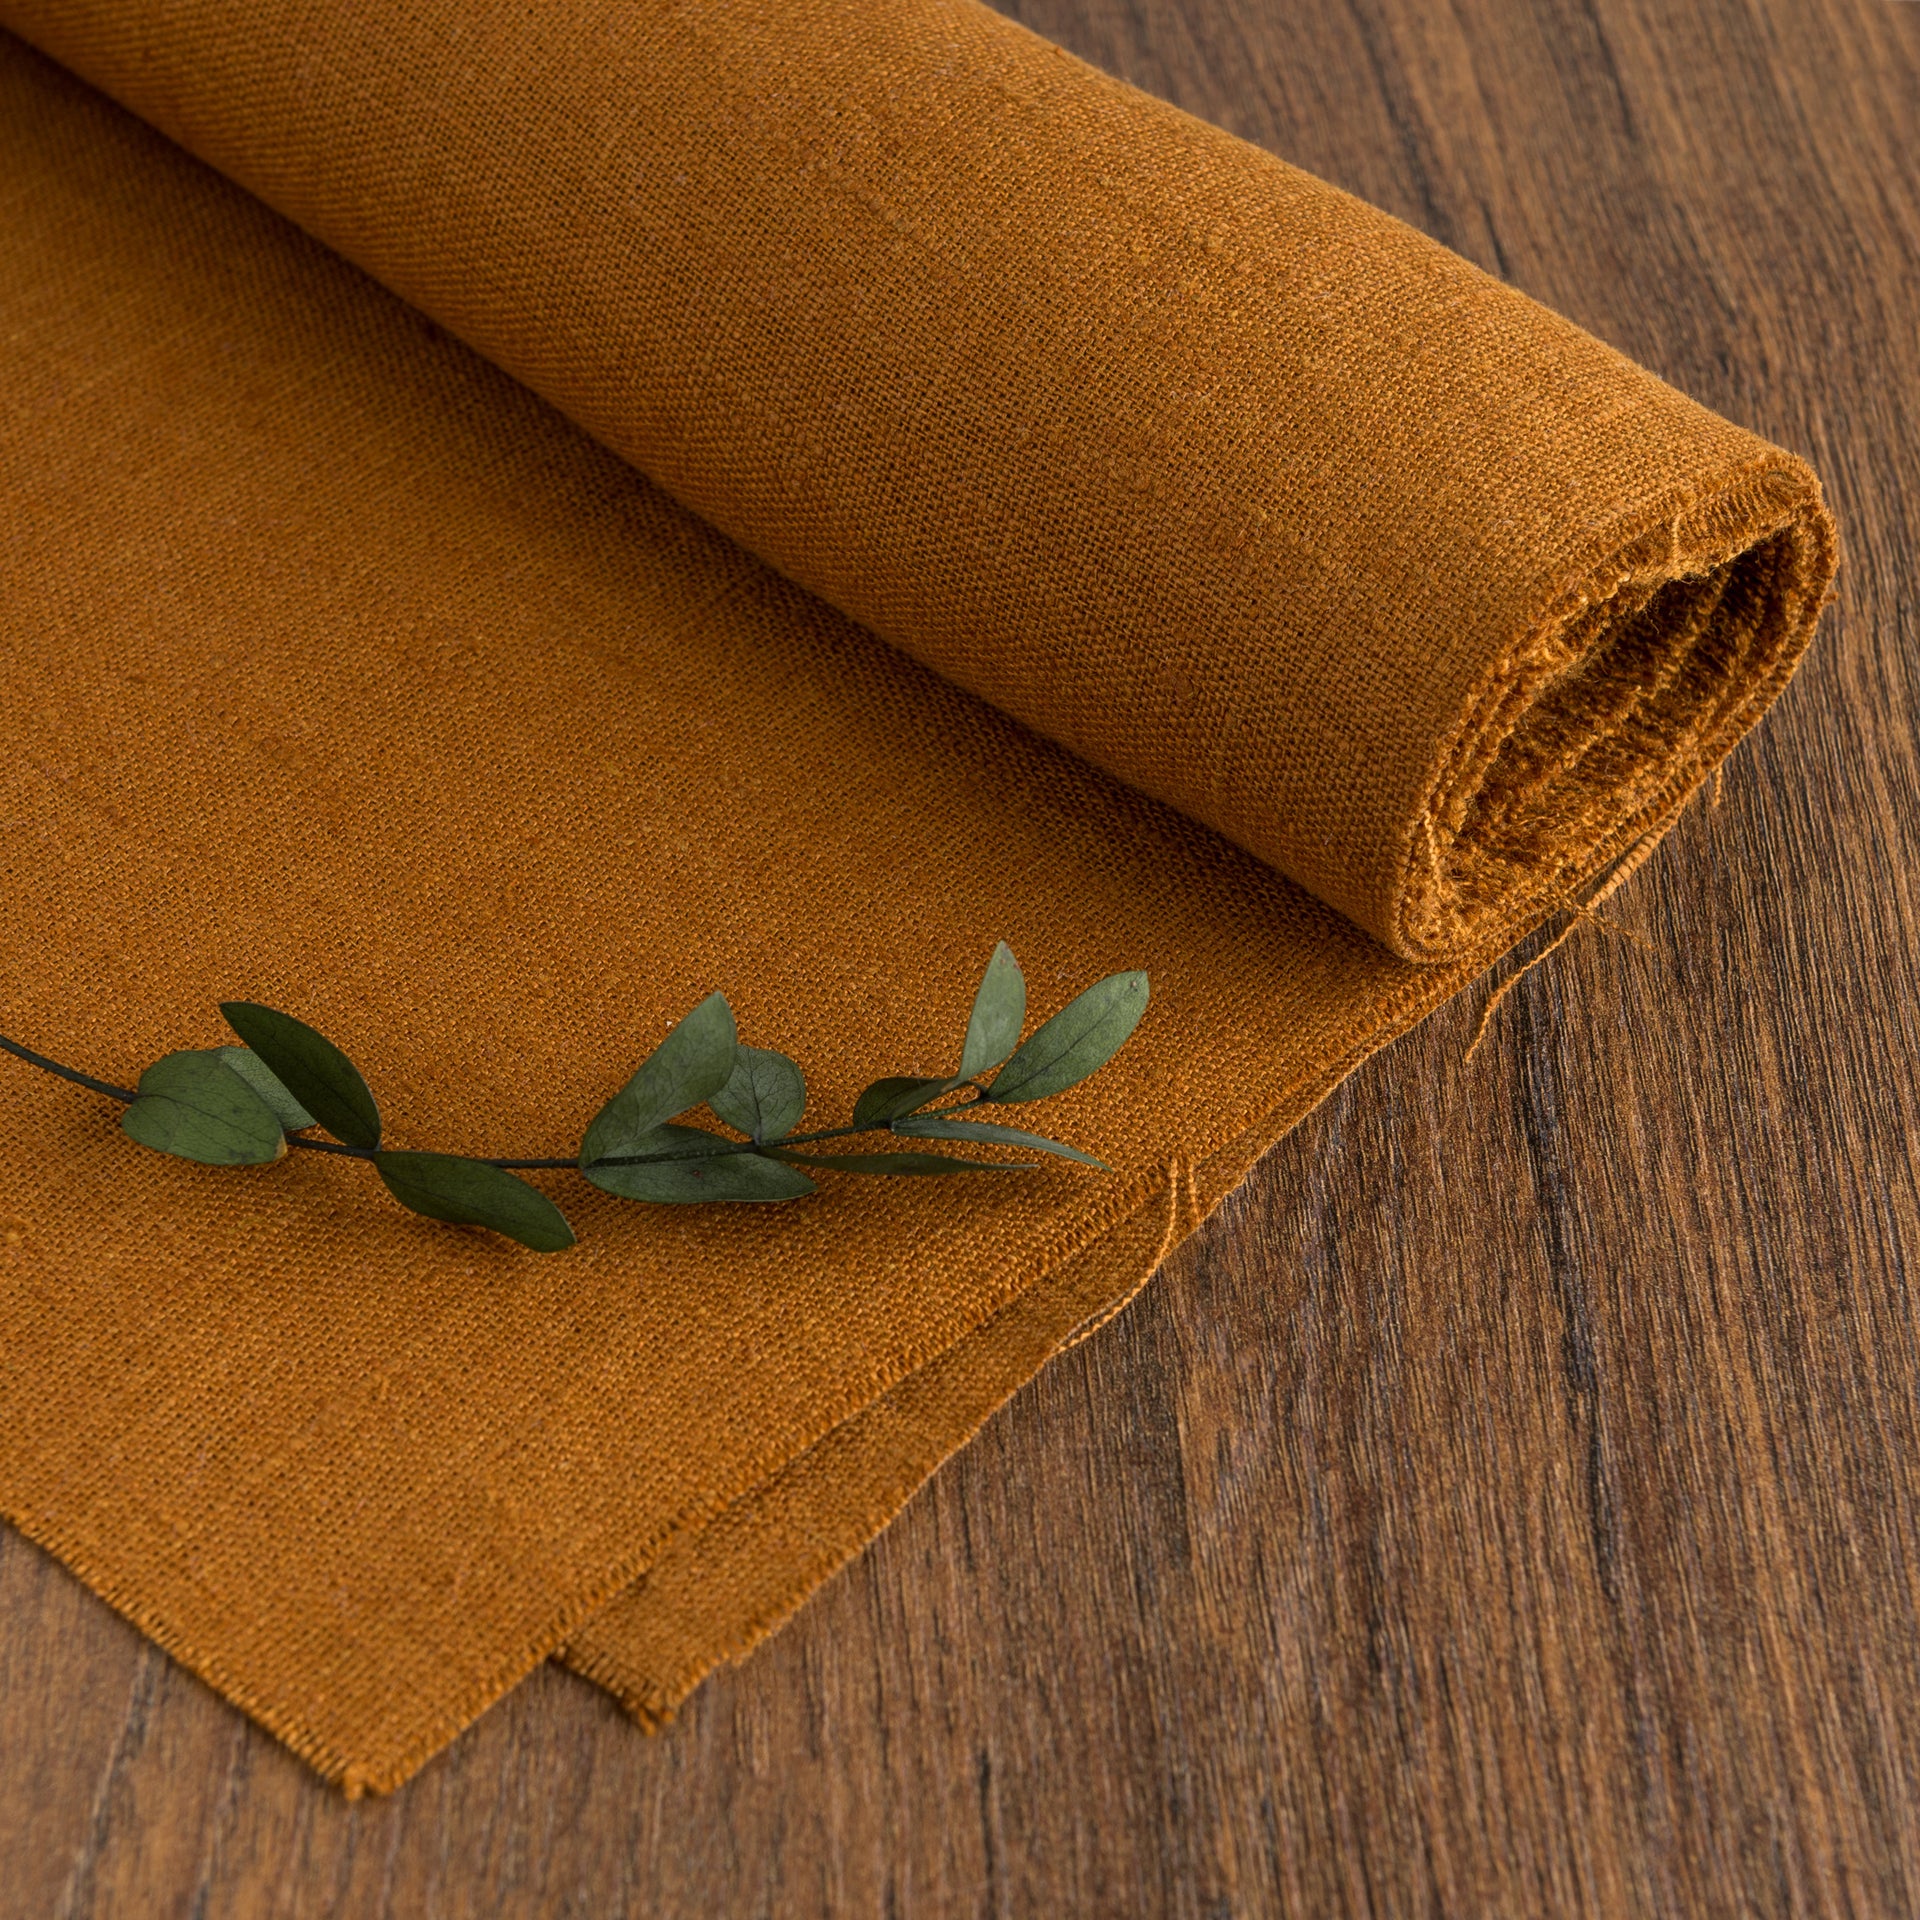 Clay Heavy Weight Linen Fabric by the Yard - 100% French Natural - Width 52”